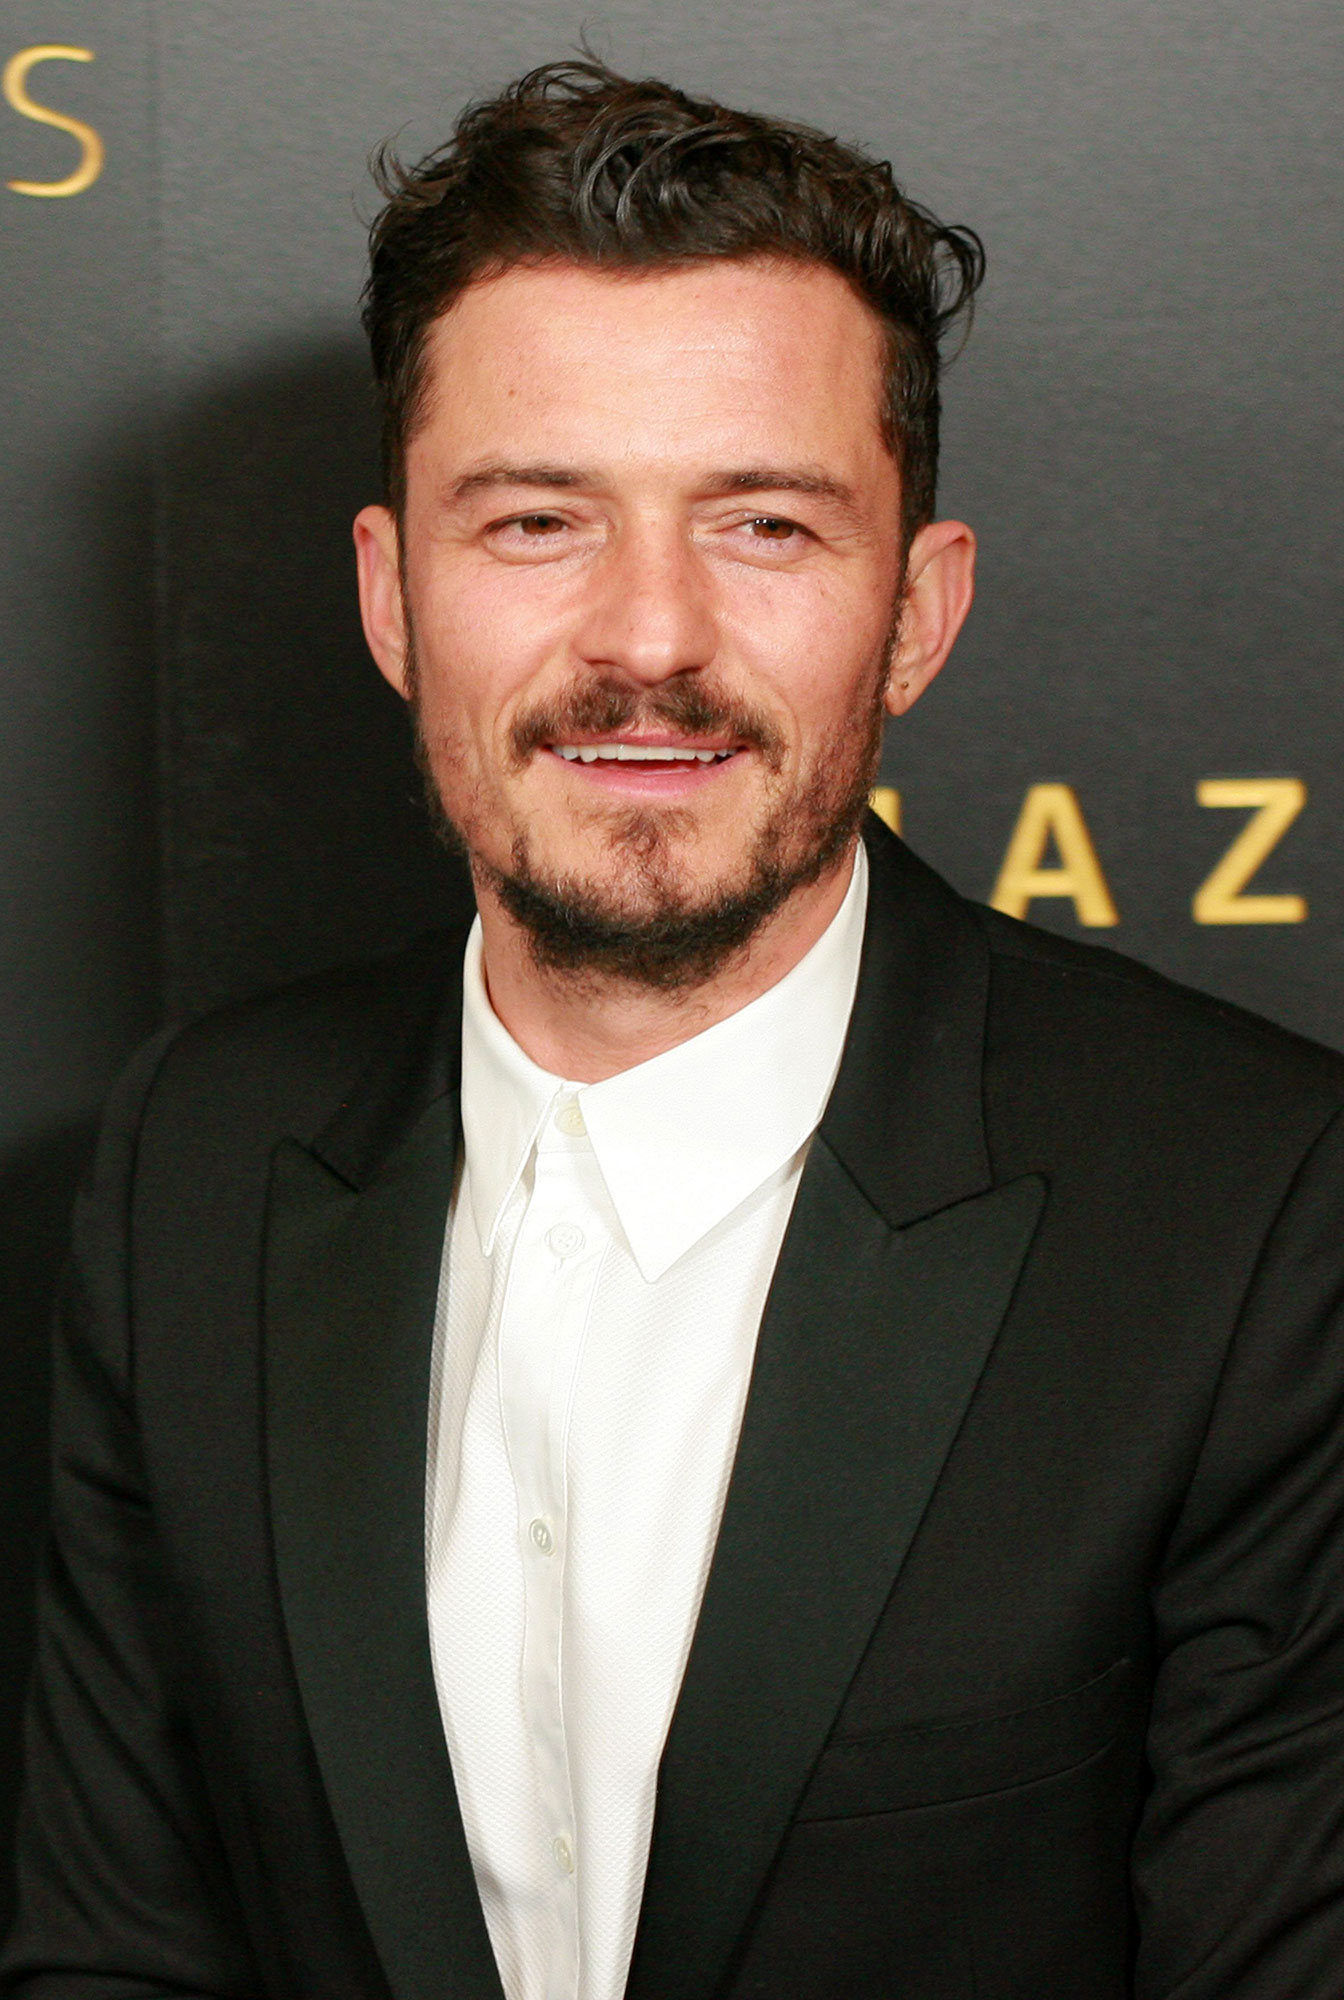 January 2020 Orlando Bloom Amazon Golden Globes After Party